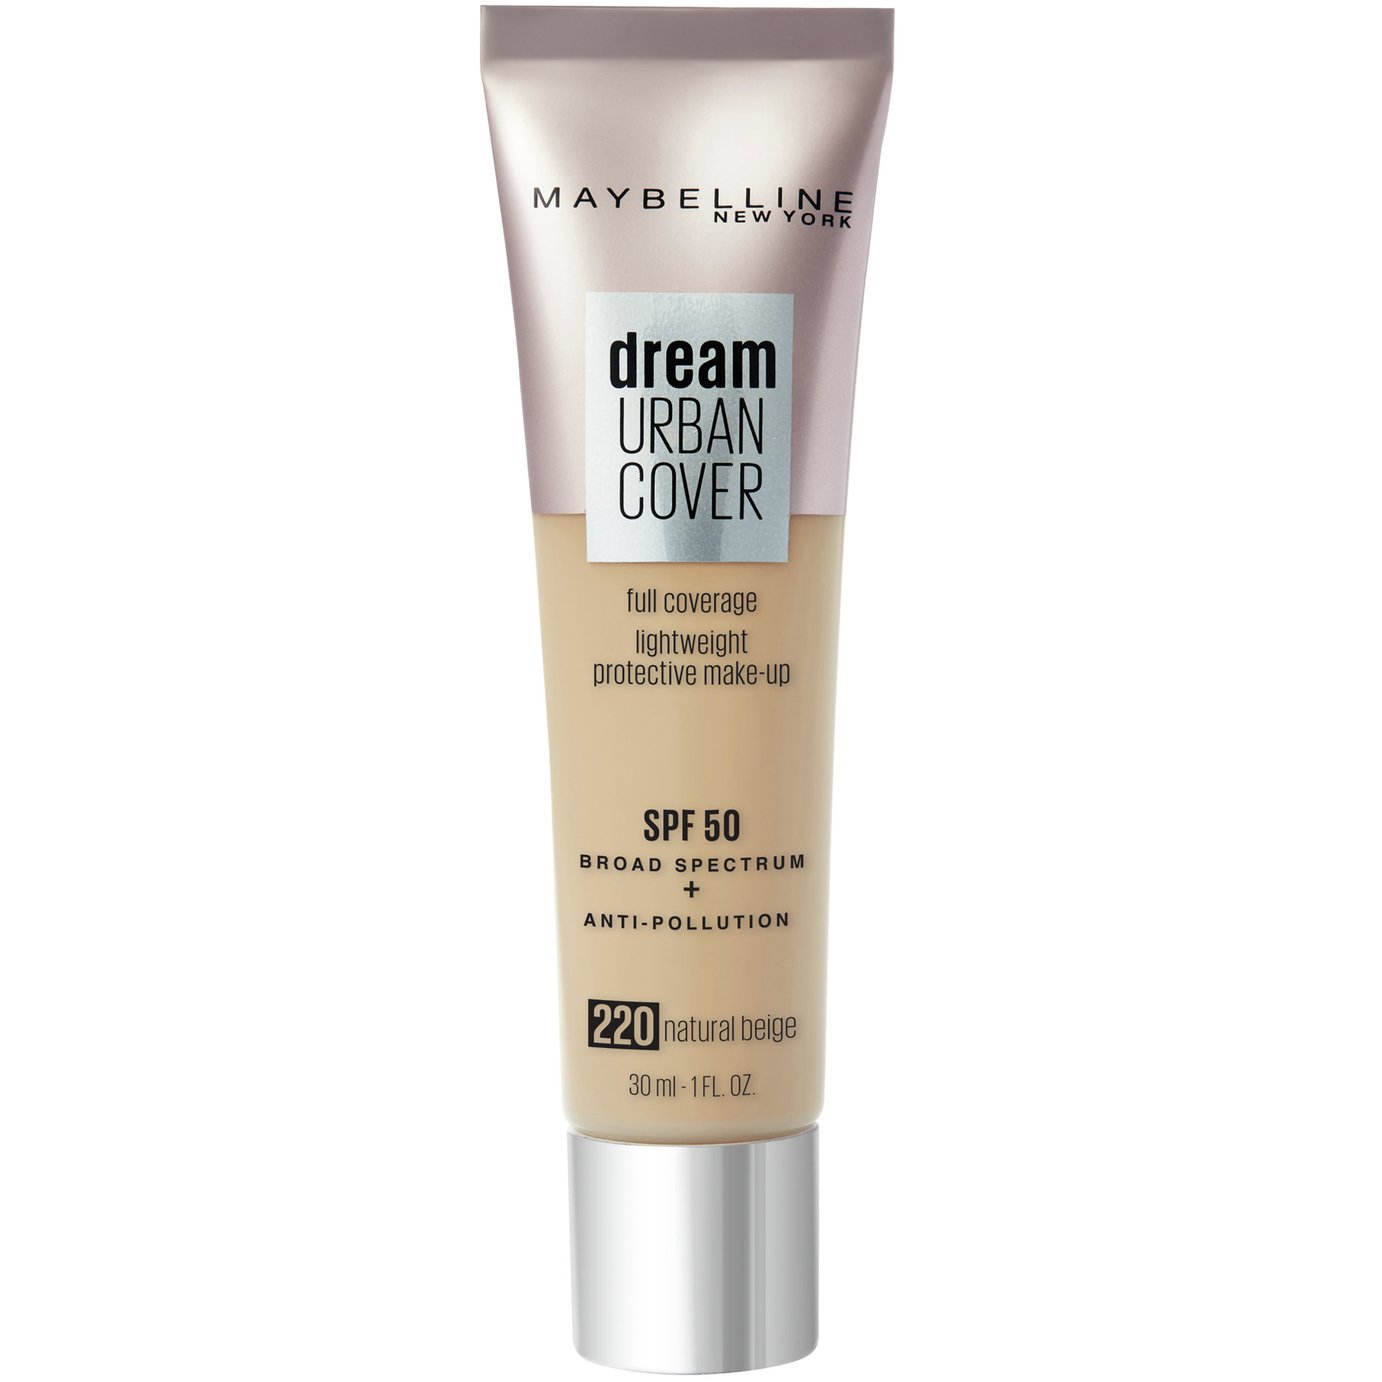 Maybelline Dream Urban Cover Foundation - Natural Beige